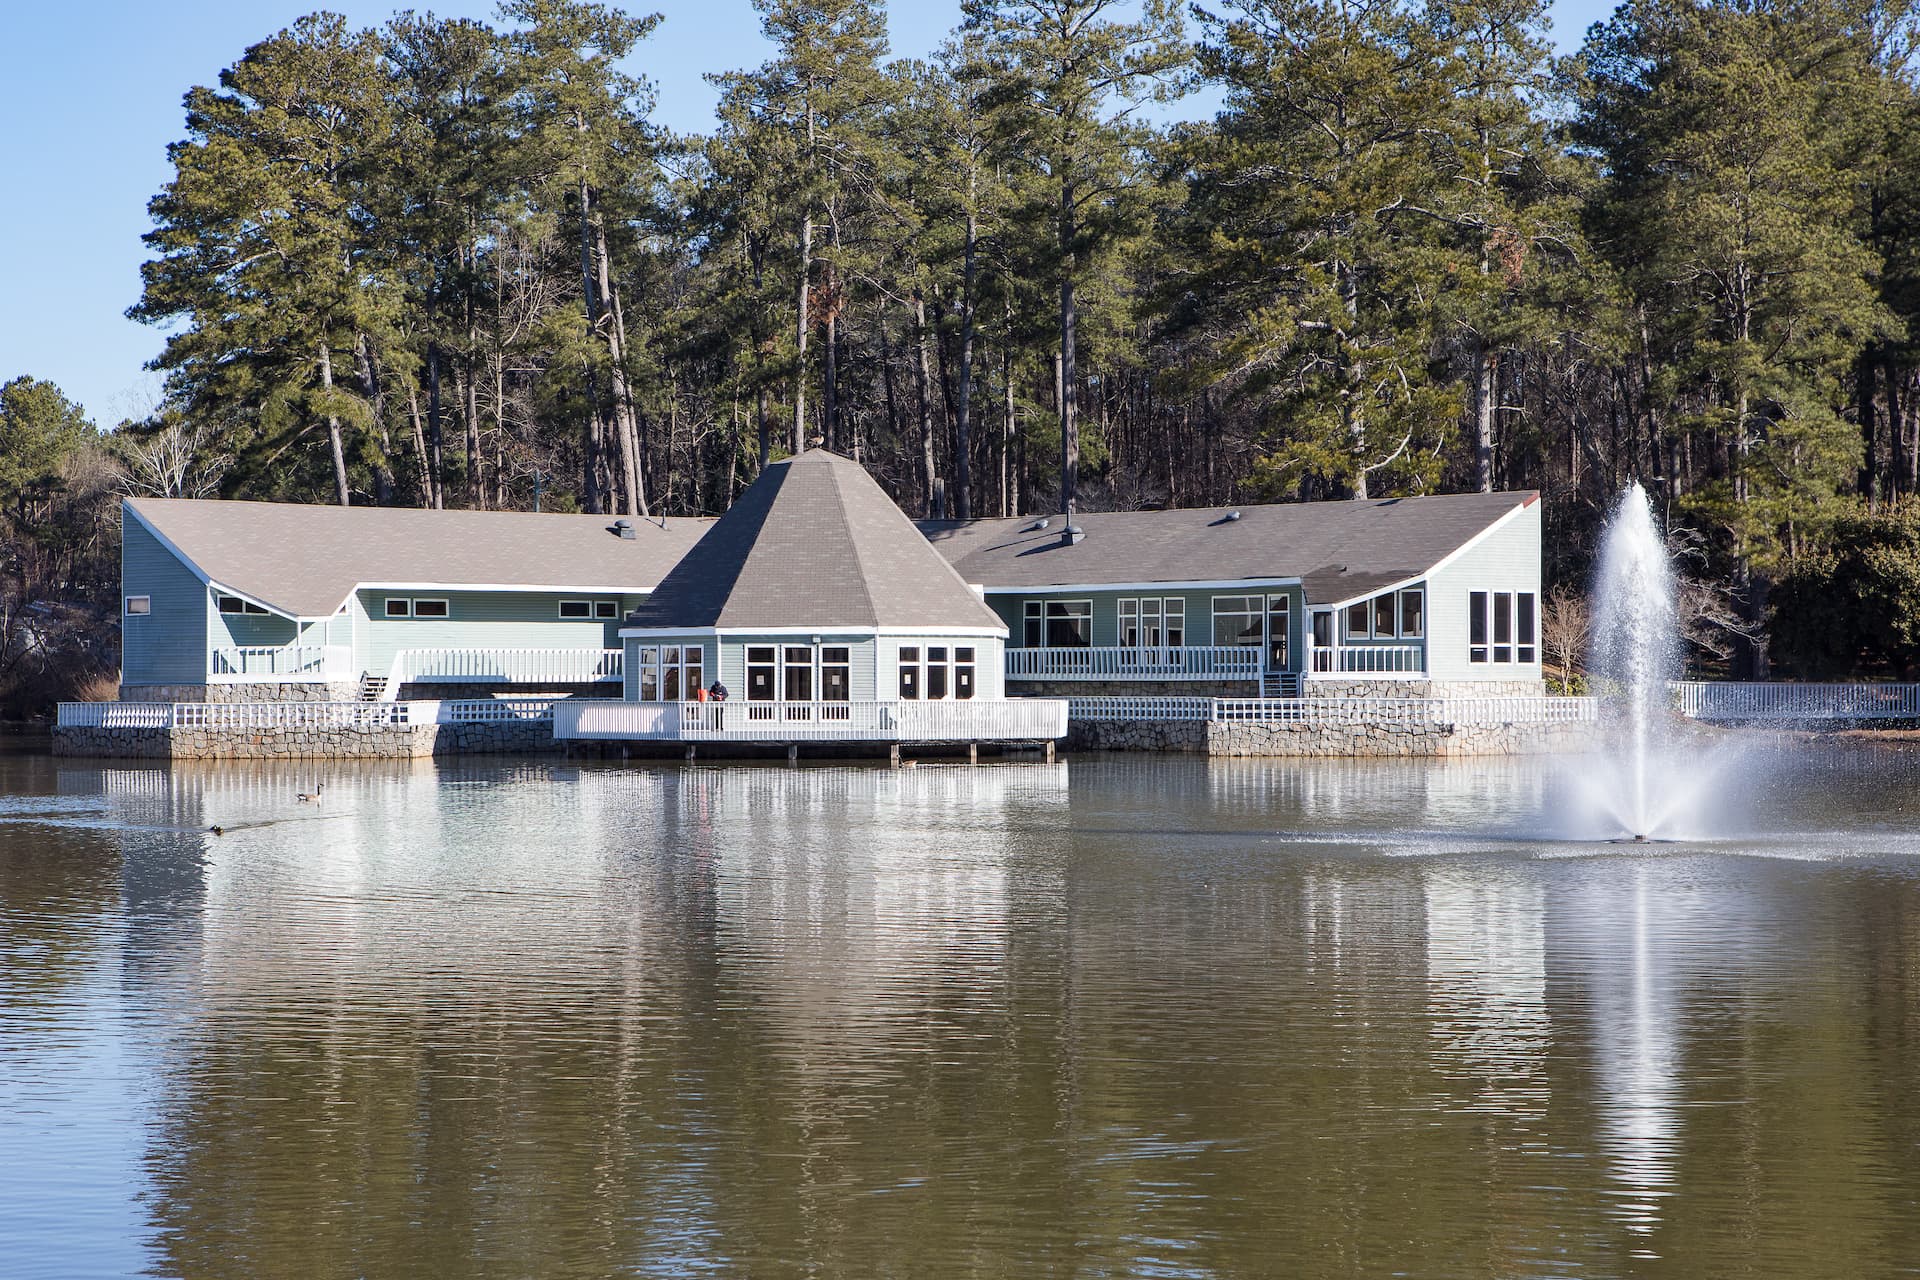 Clubhouse next to pond